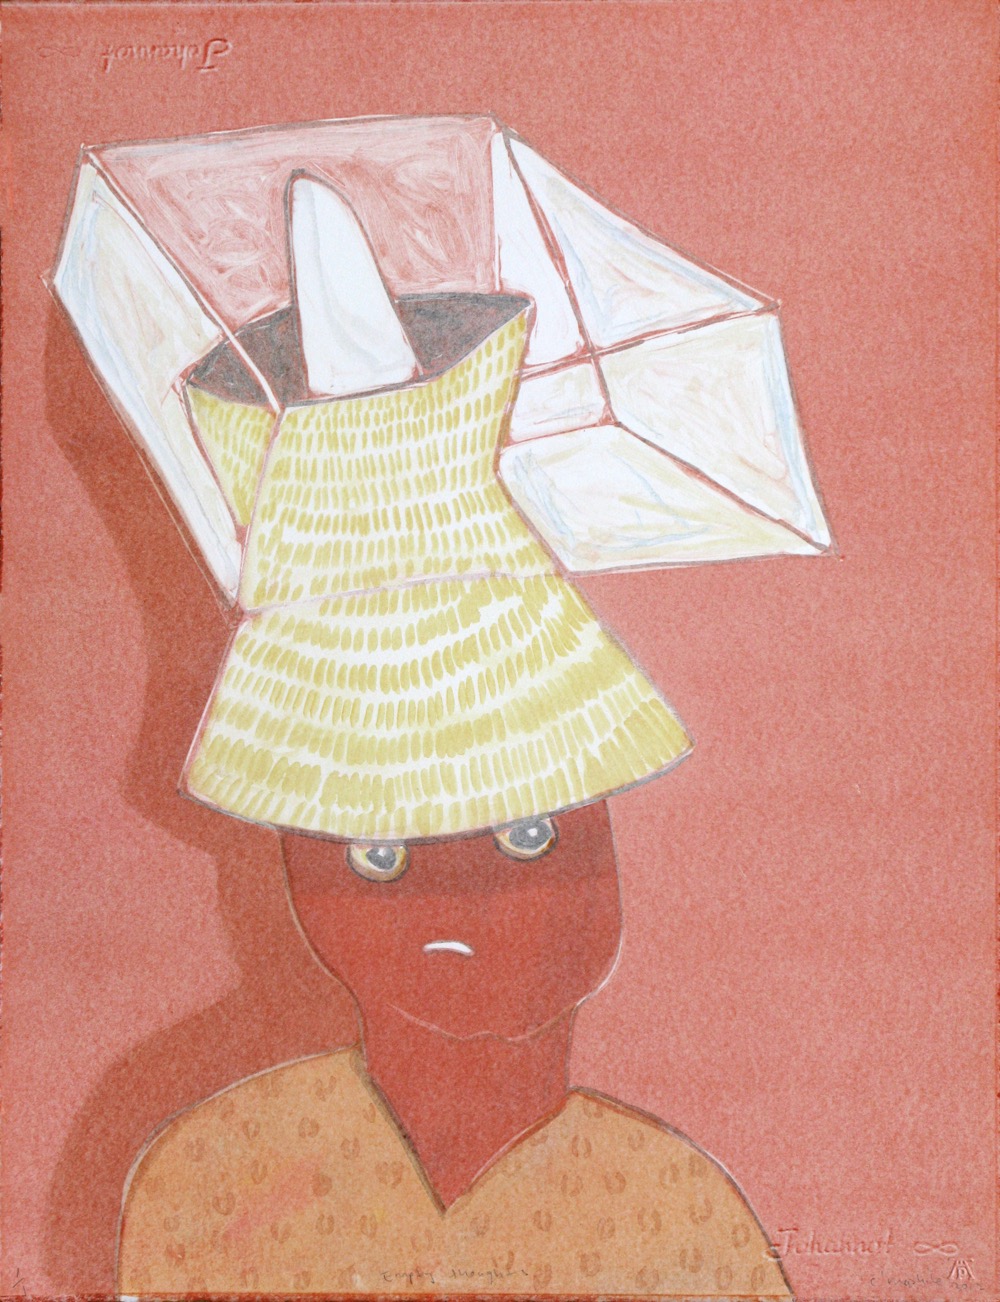 Human head and shoulders with simplified features with hat and box construction on head.